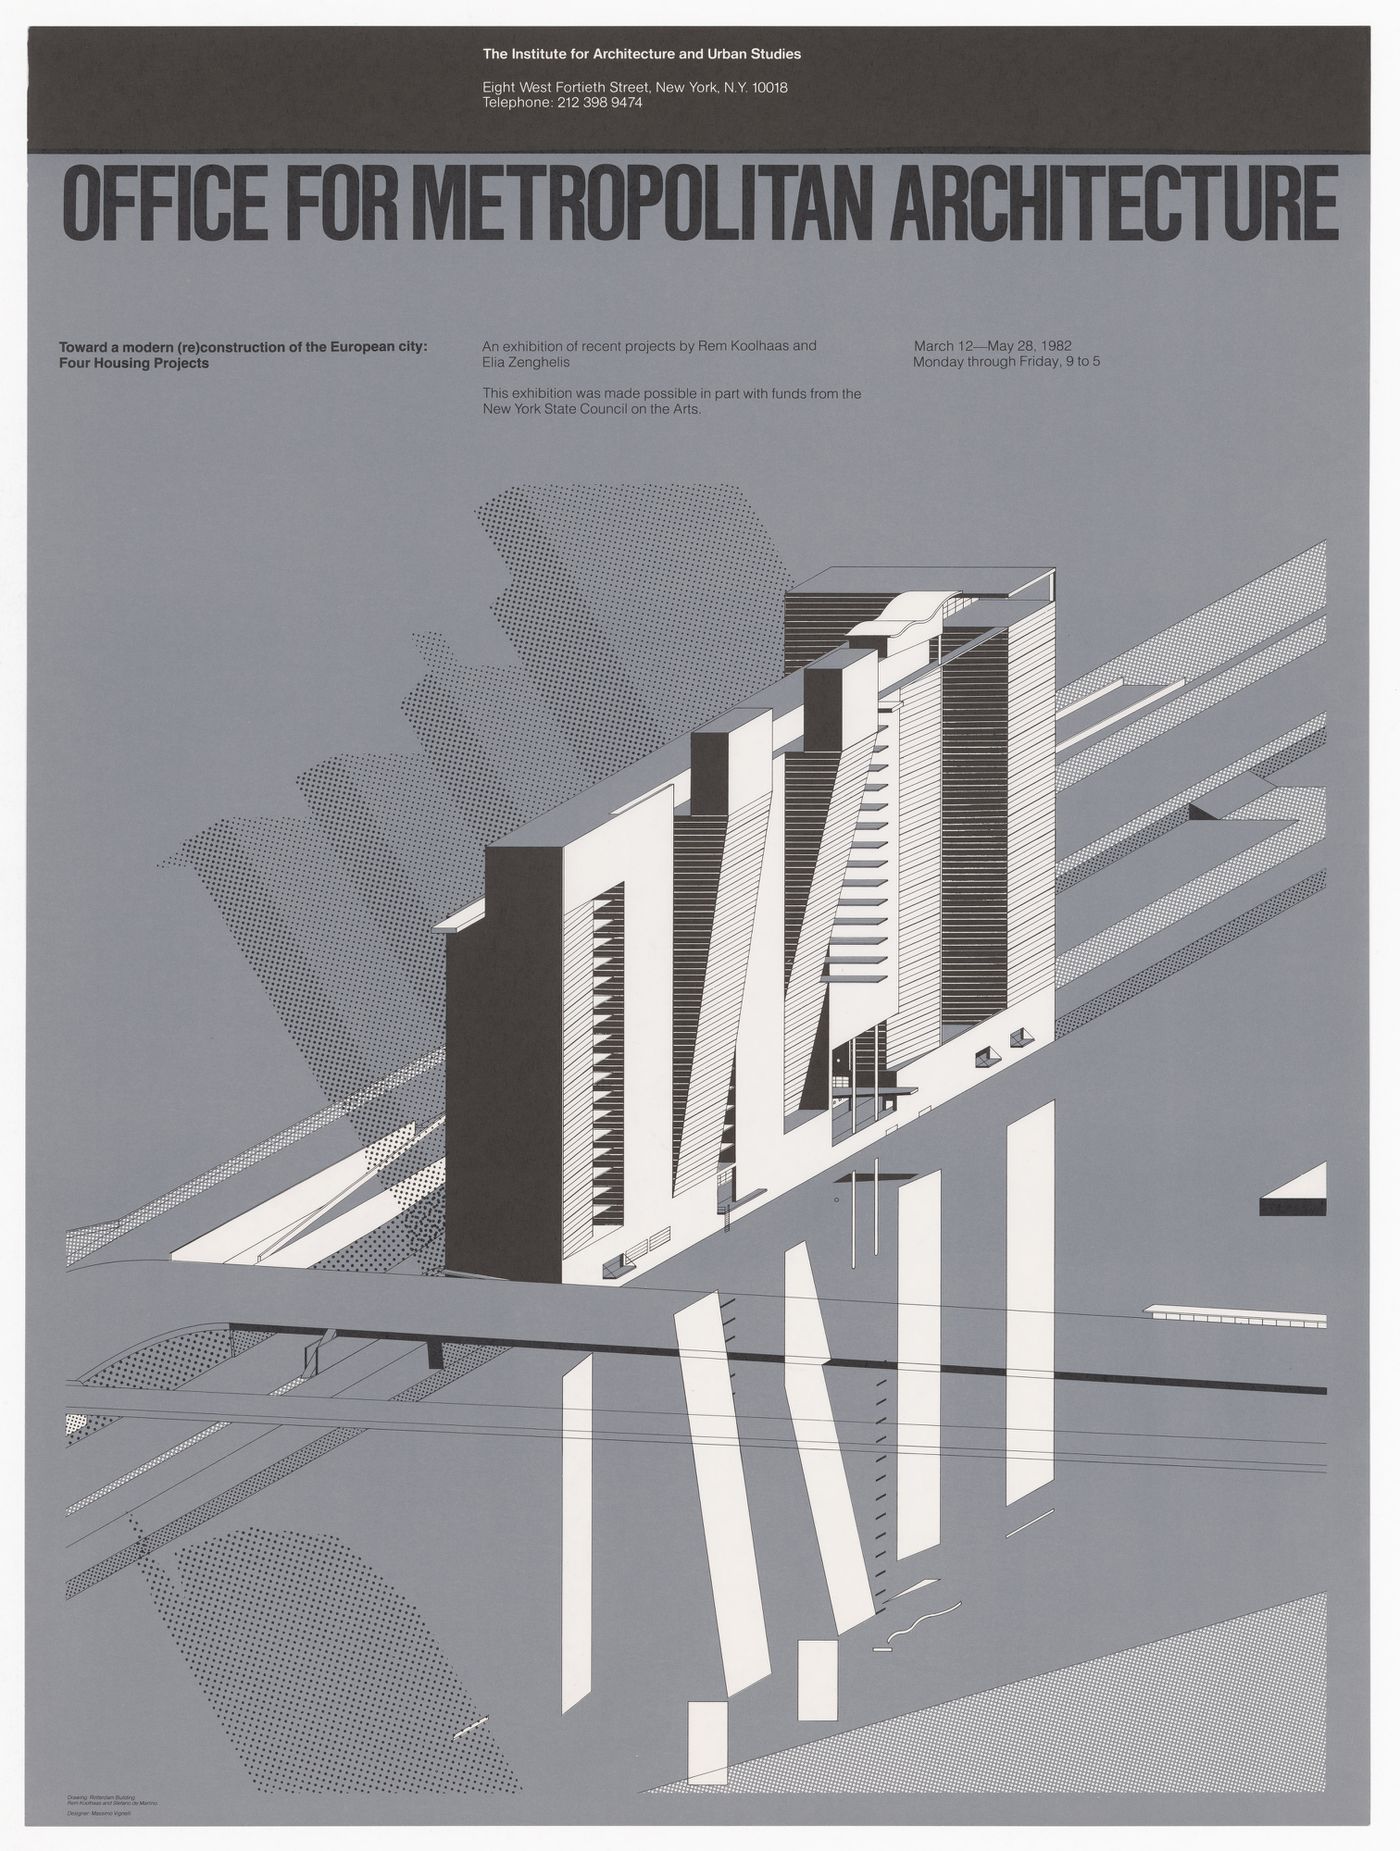 Poster for the exhibition Office for Metropolitan Architecture: Toward a modern (re)construction of the European City - Four Housing Projects